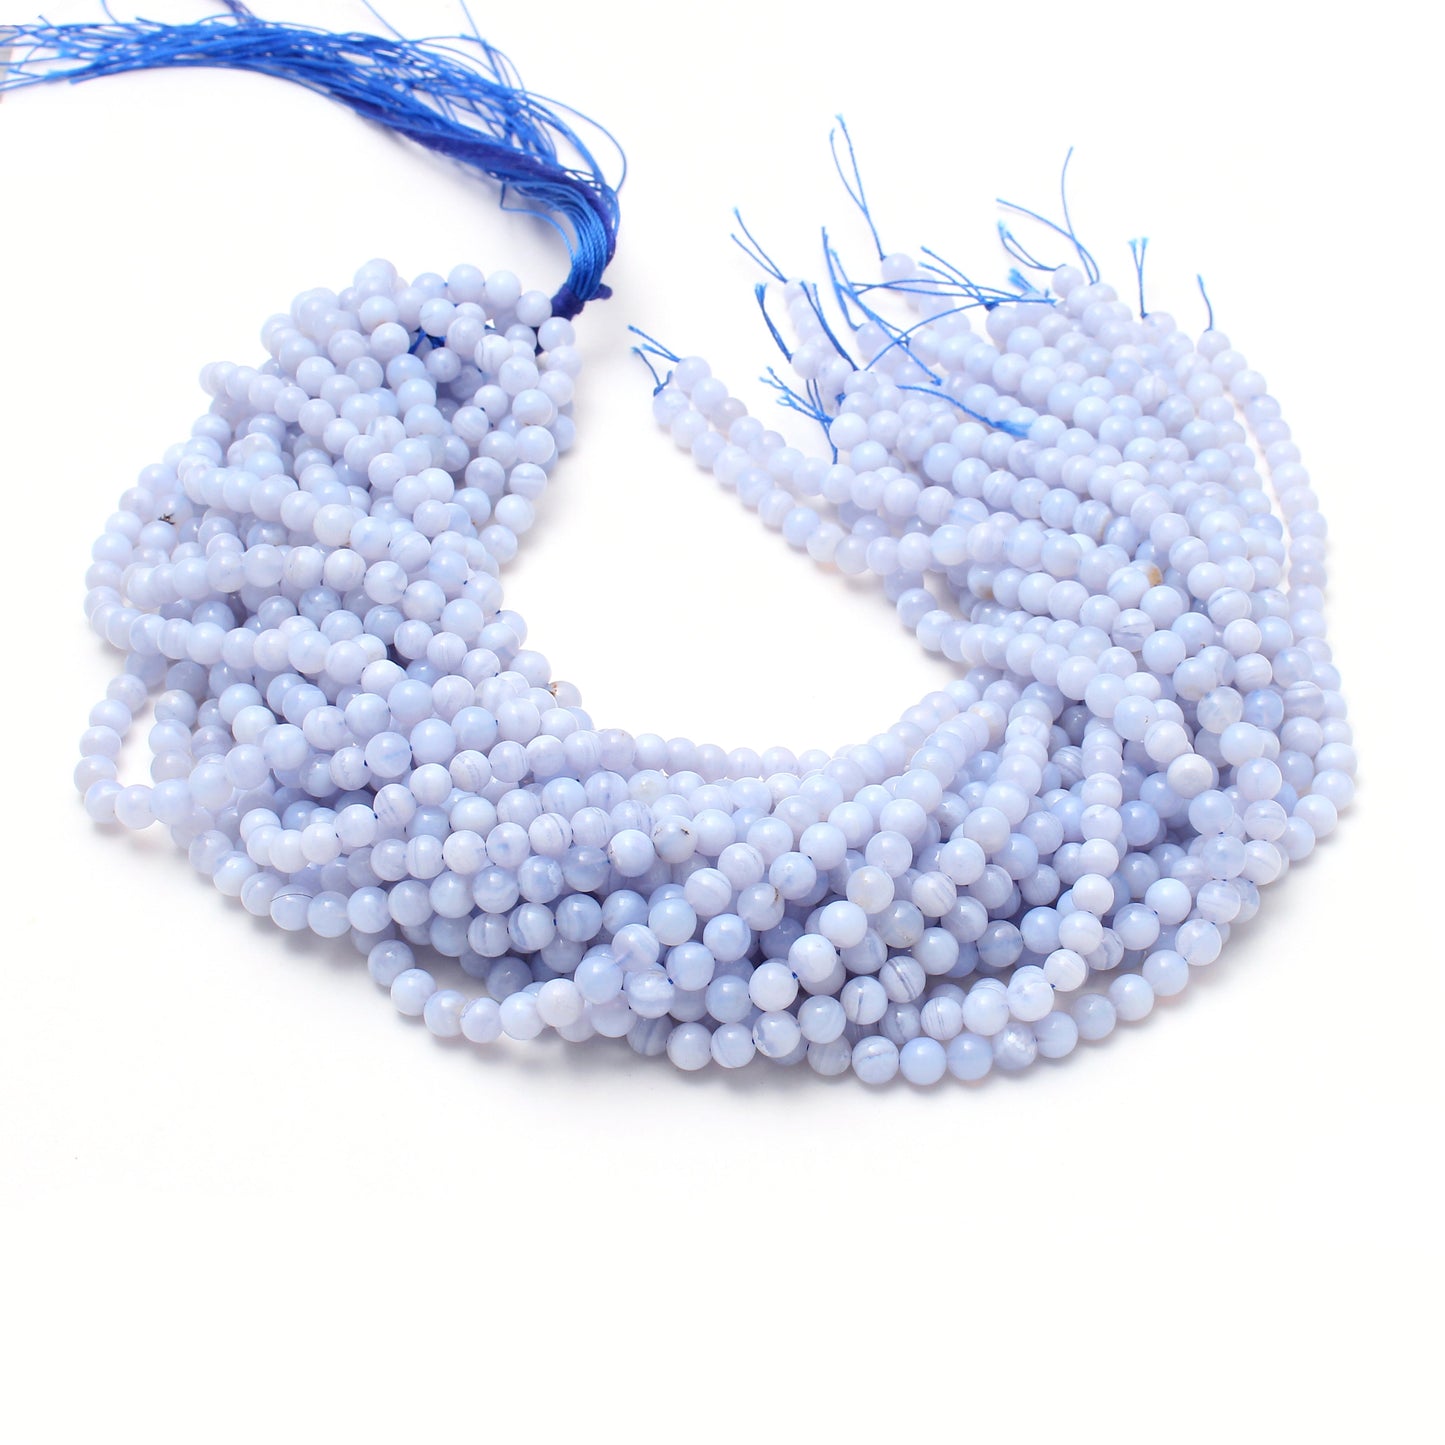 Blue Lace Agate Round Beads Strand, 6 mm Healing Beads, 16 Inches Strand GemsRush